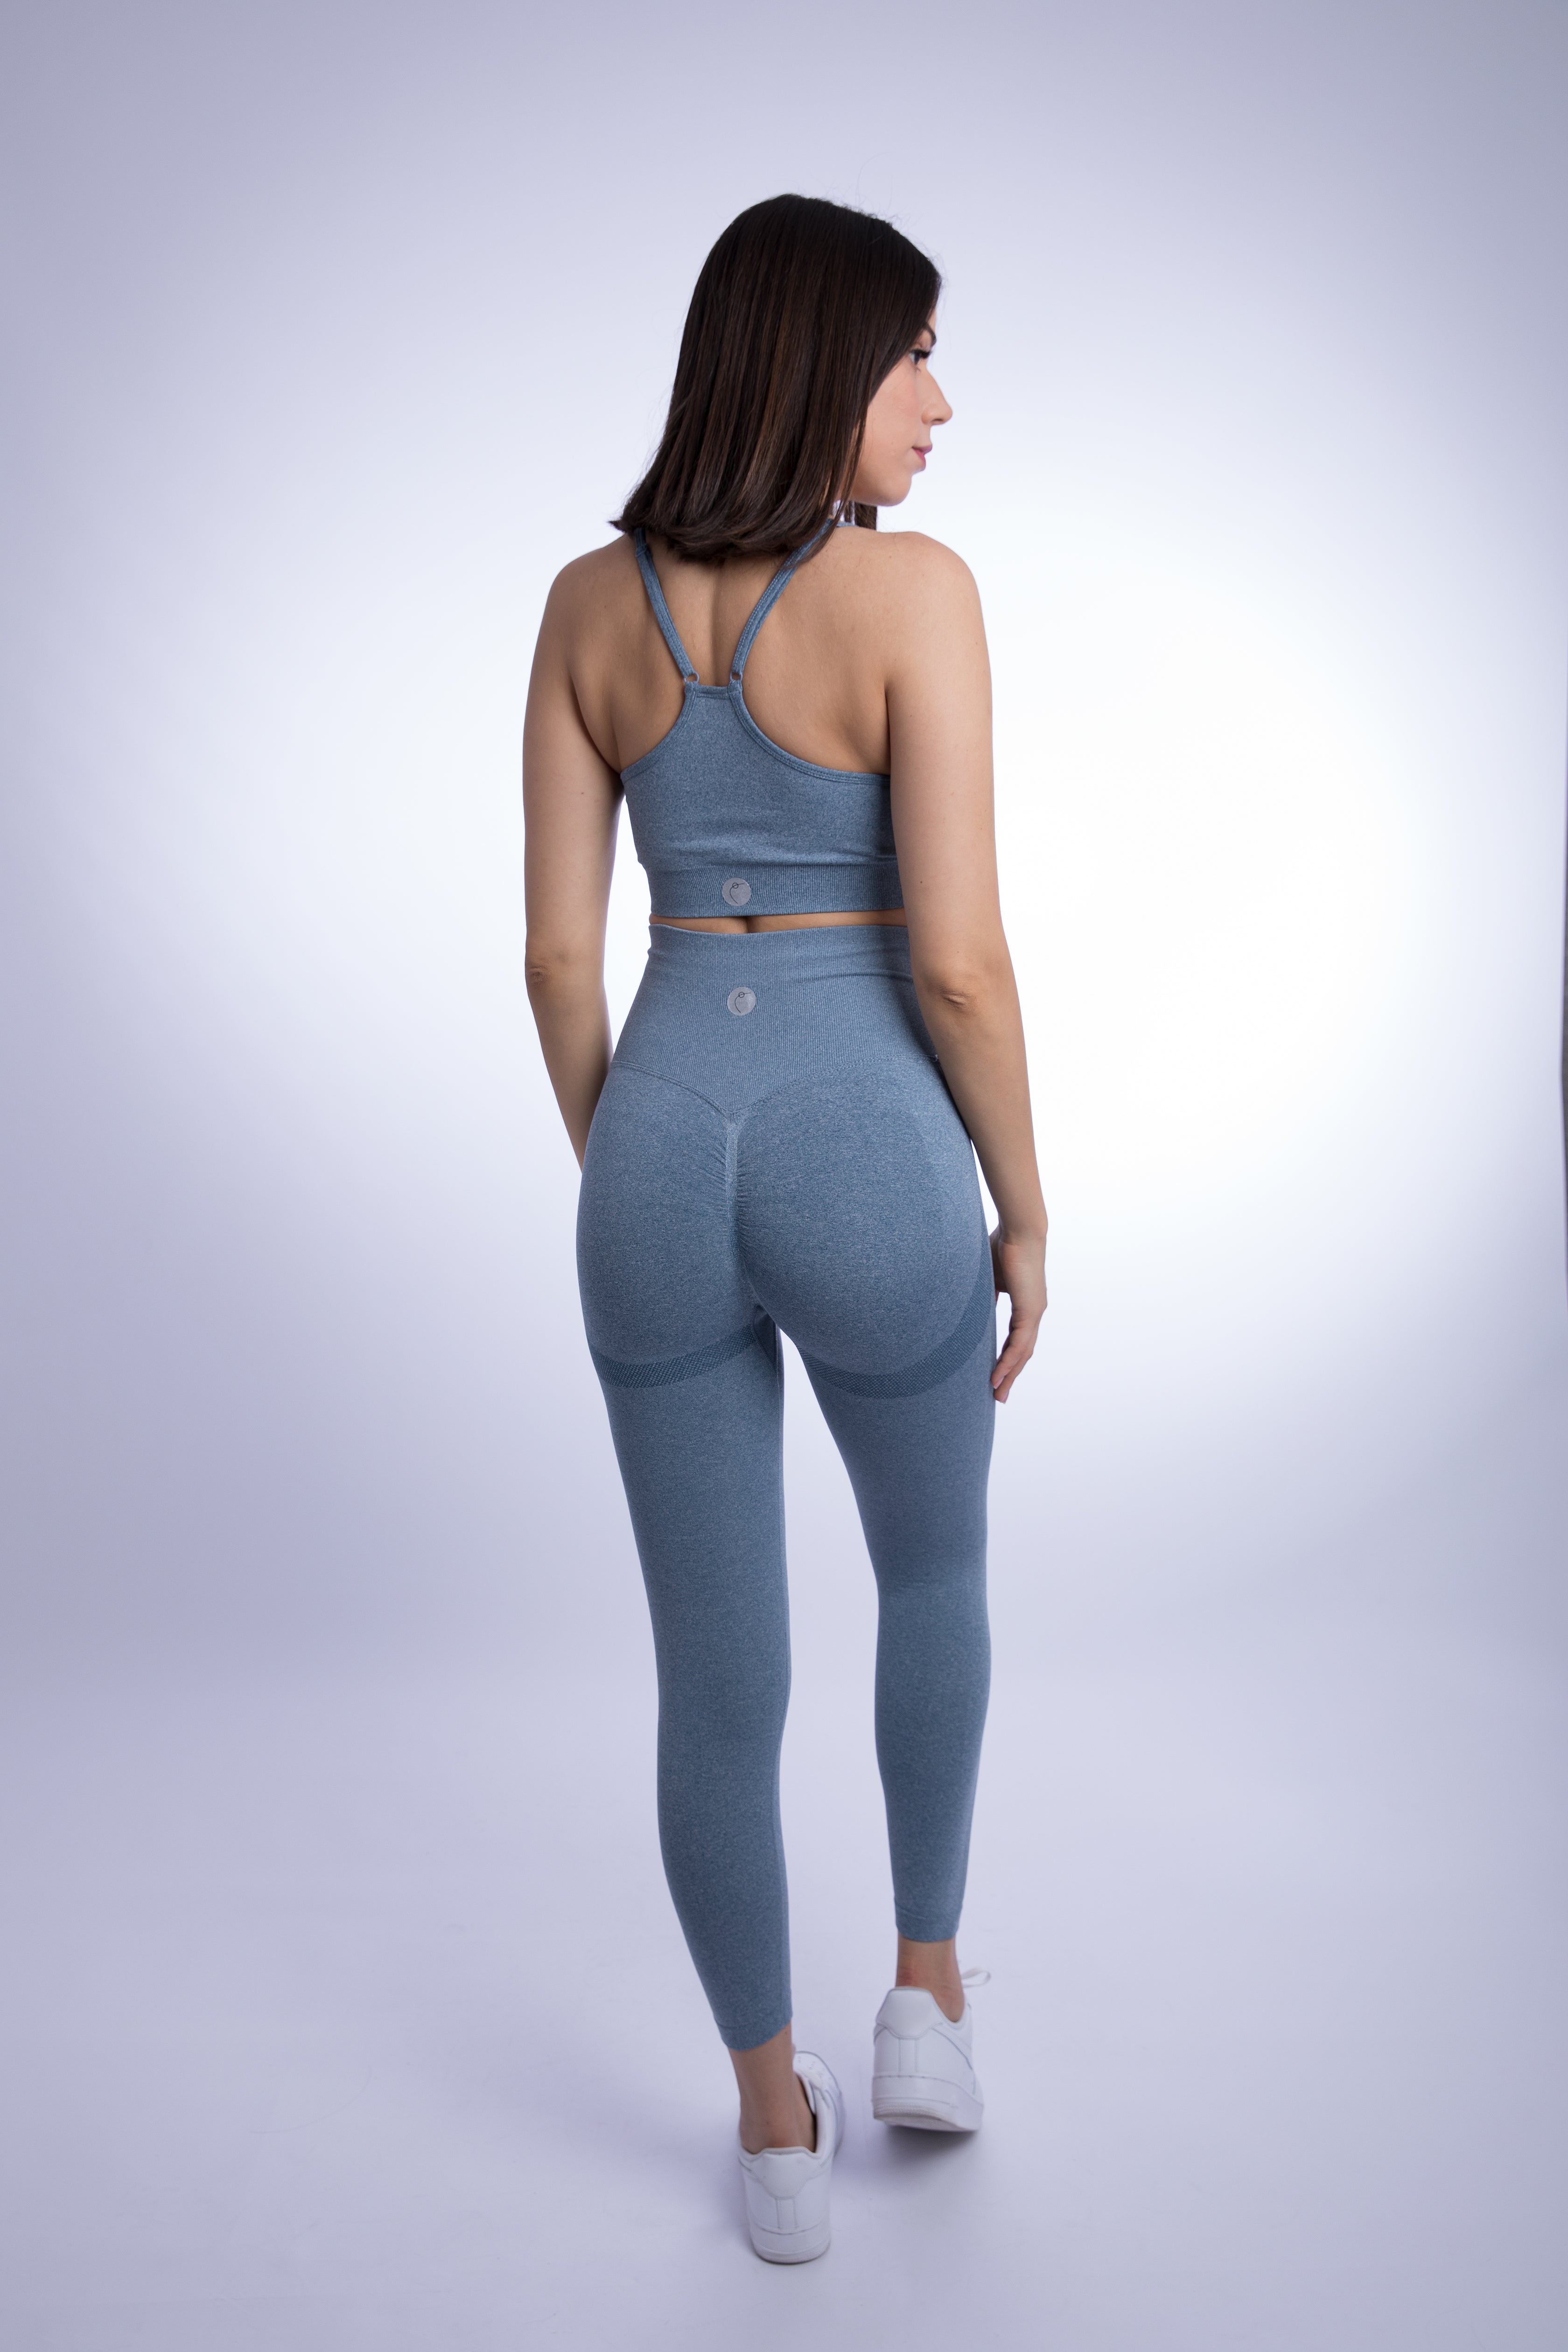 Jasmine Seamless Set with Crop Strap Top and Legging S Peach